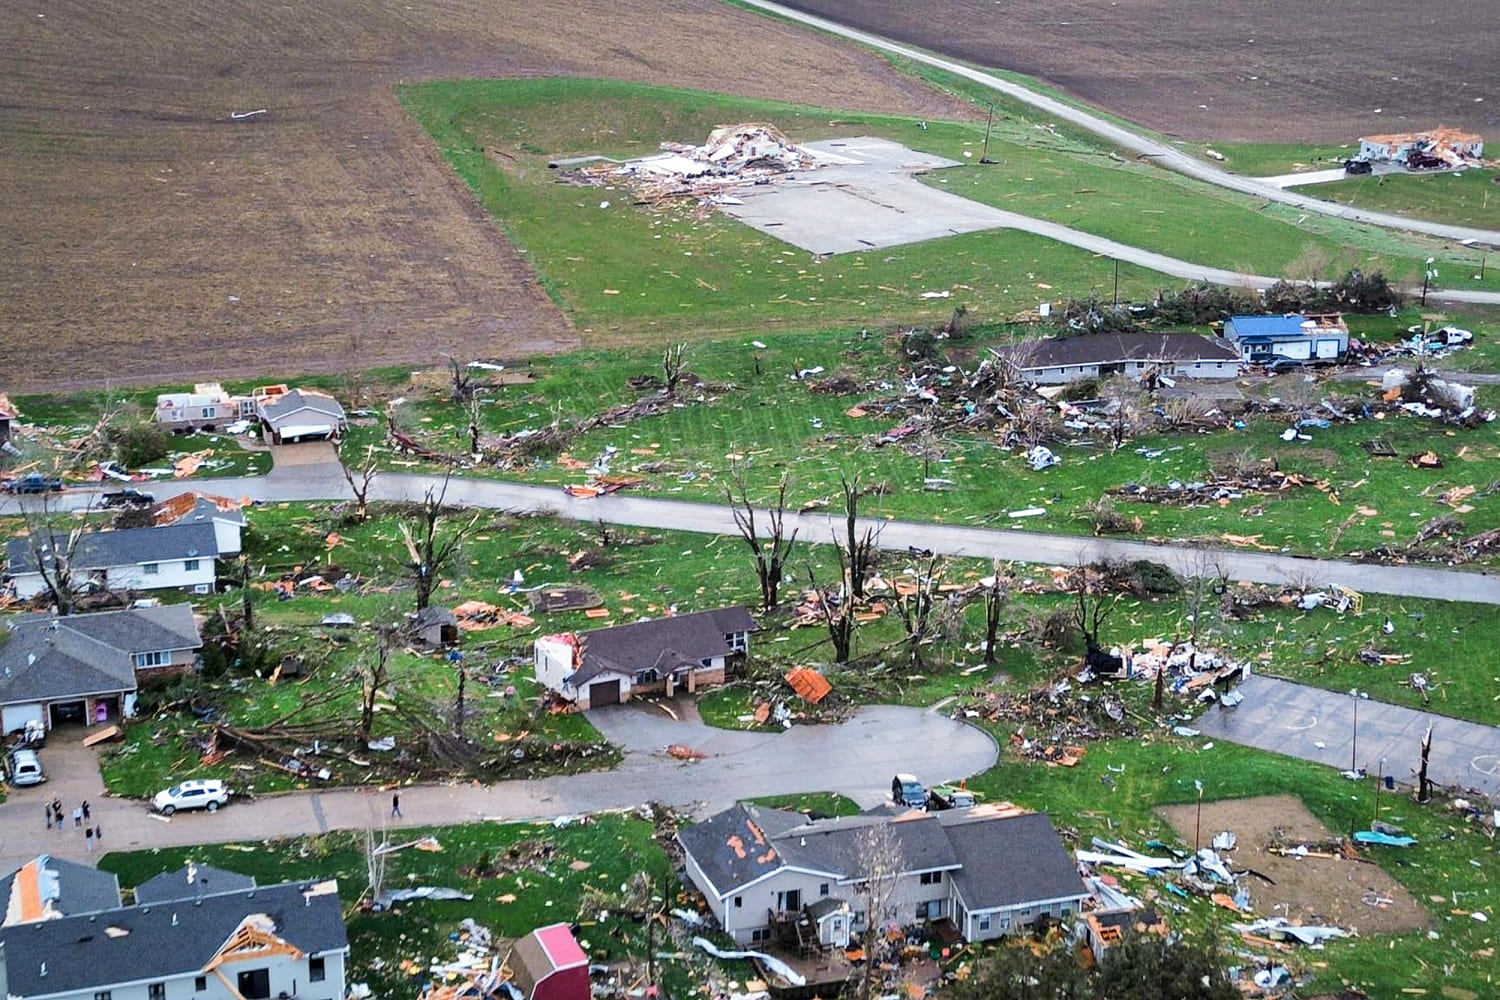 Midwest emerges from a night of tornadoes, storms, begins to assess destruction